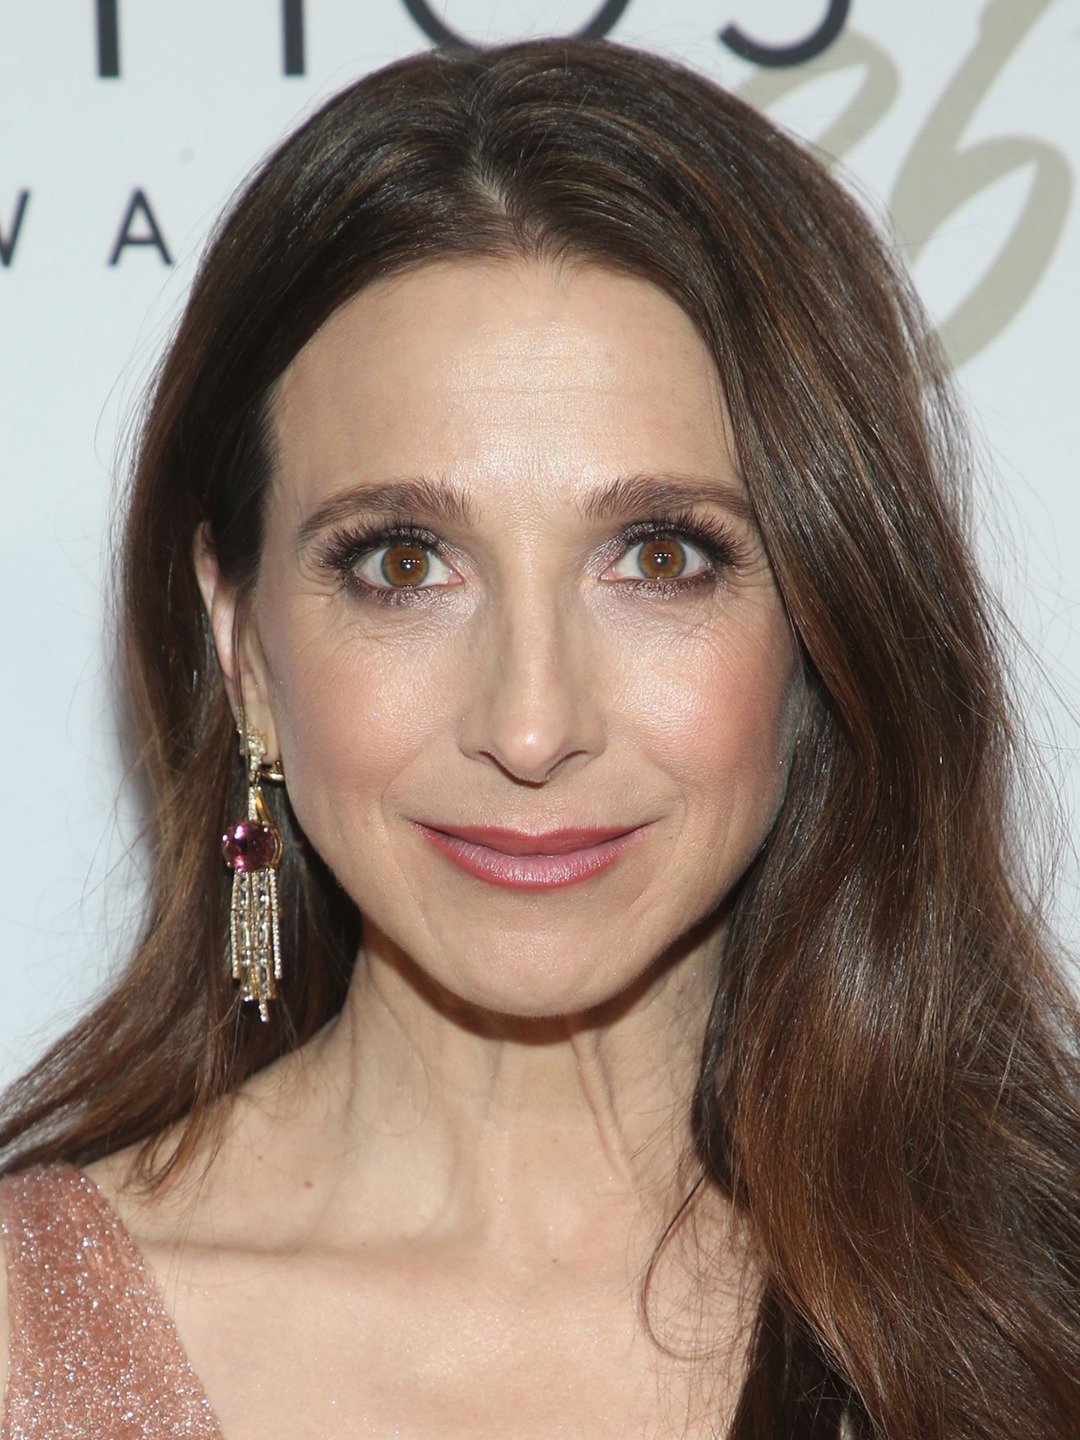 Marin hinkle movies and tv shows